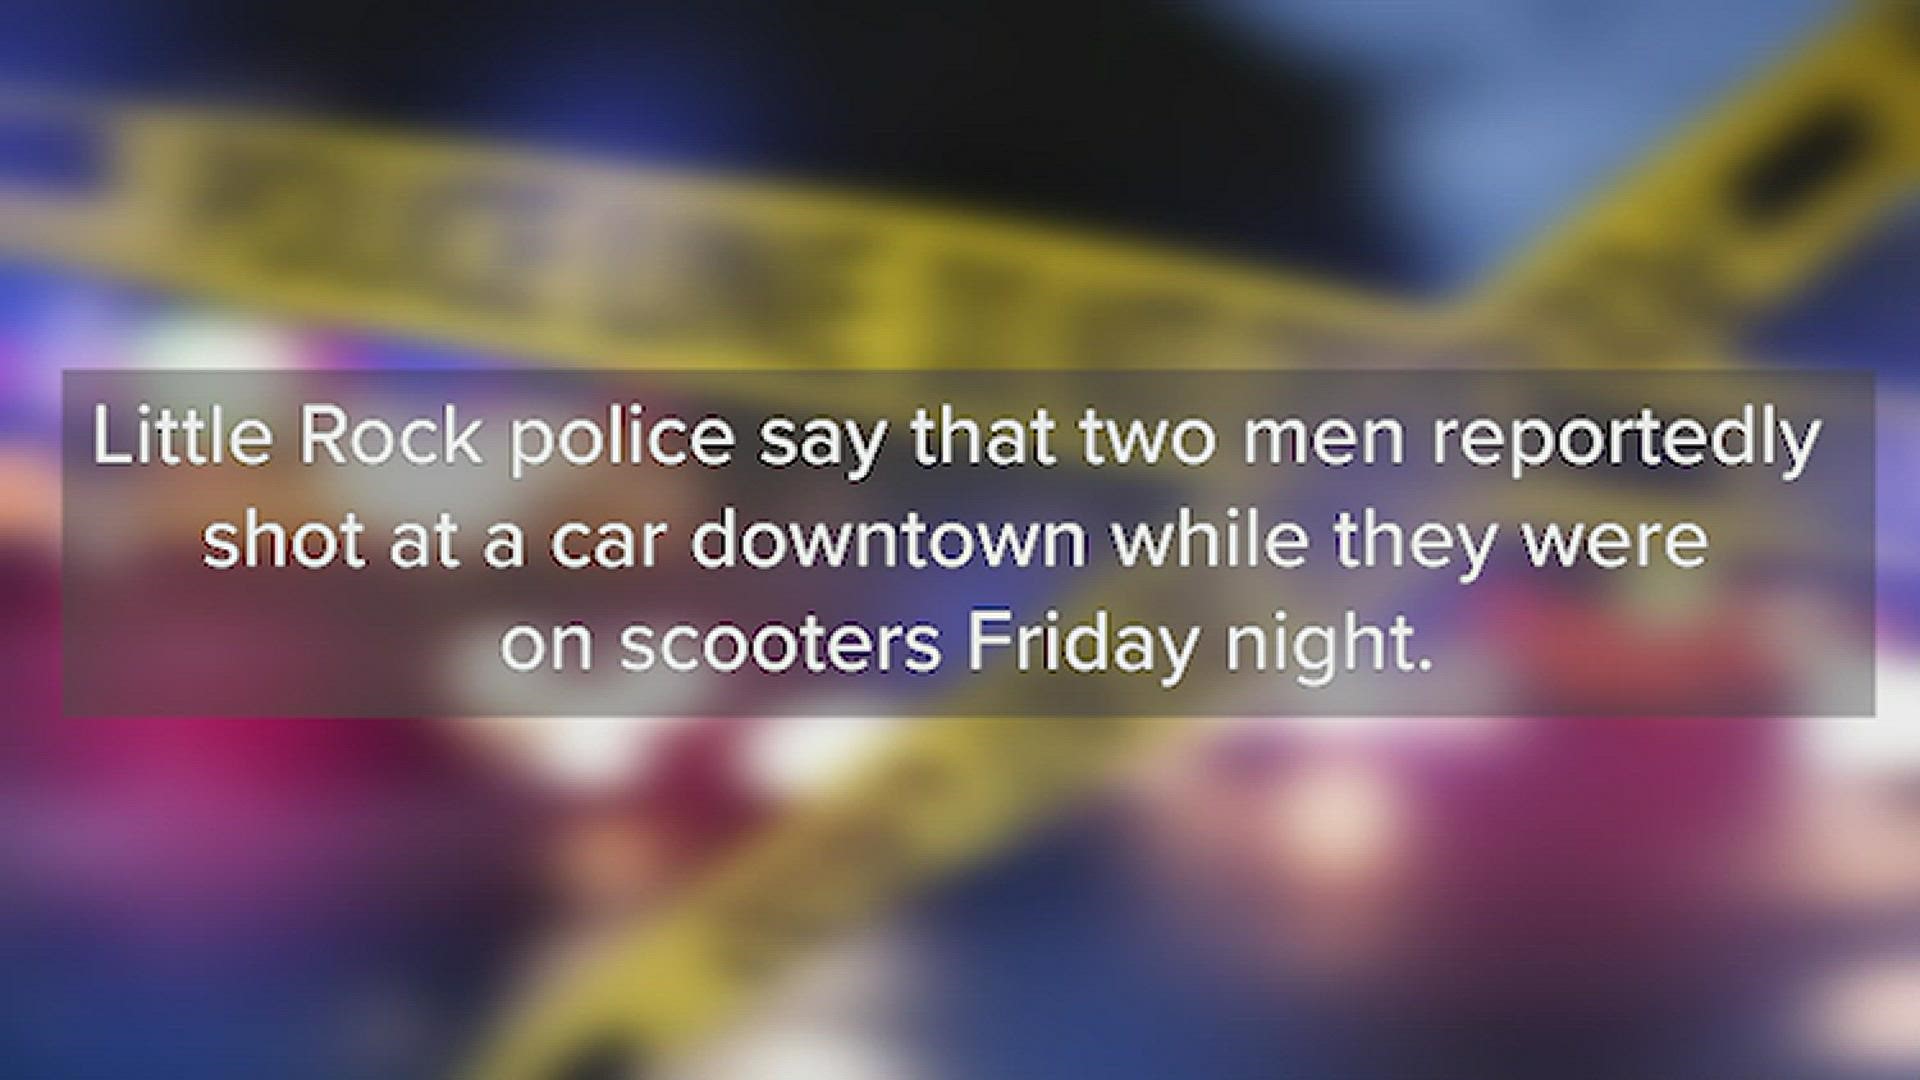 According to police, two men on scooters shot at a car in downtown Little Rock on Friday after allegedly blocking the roadway.